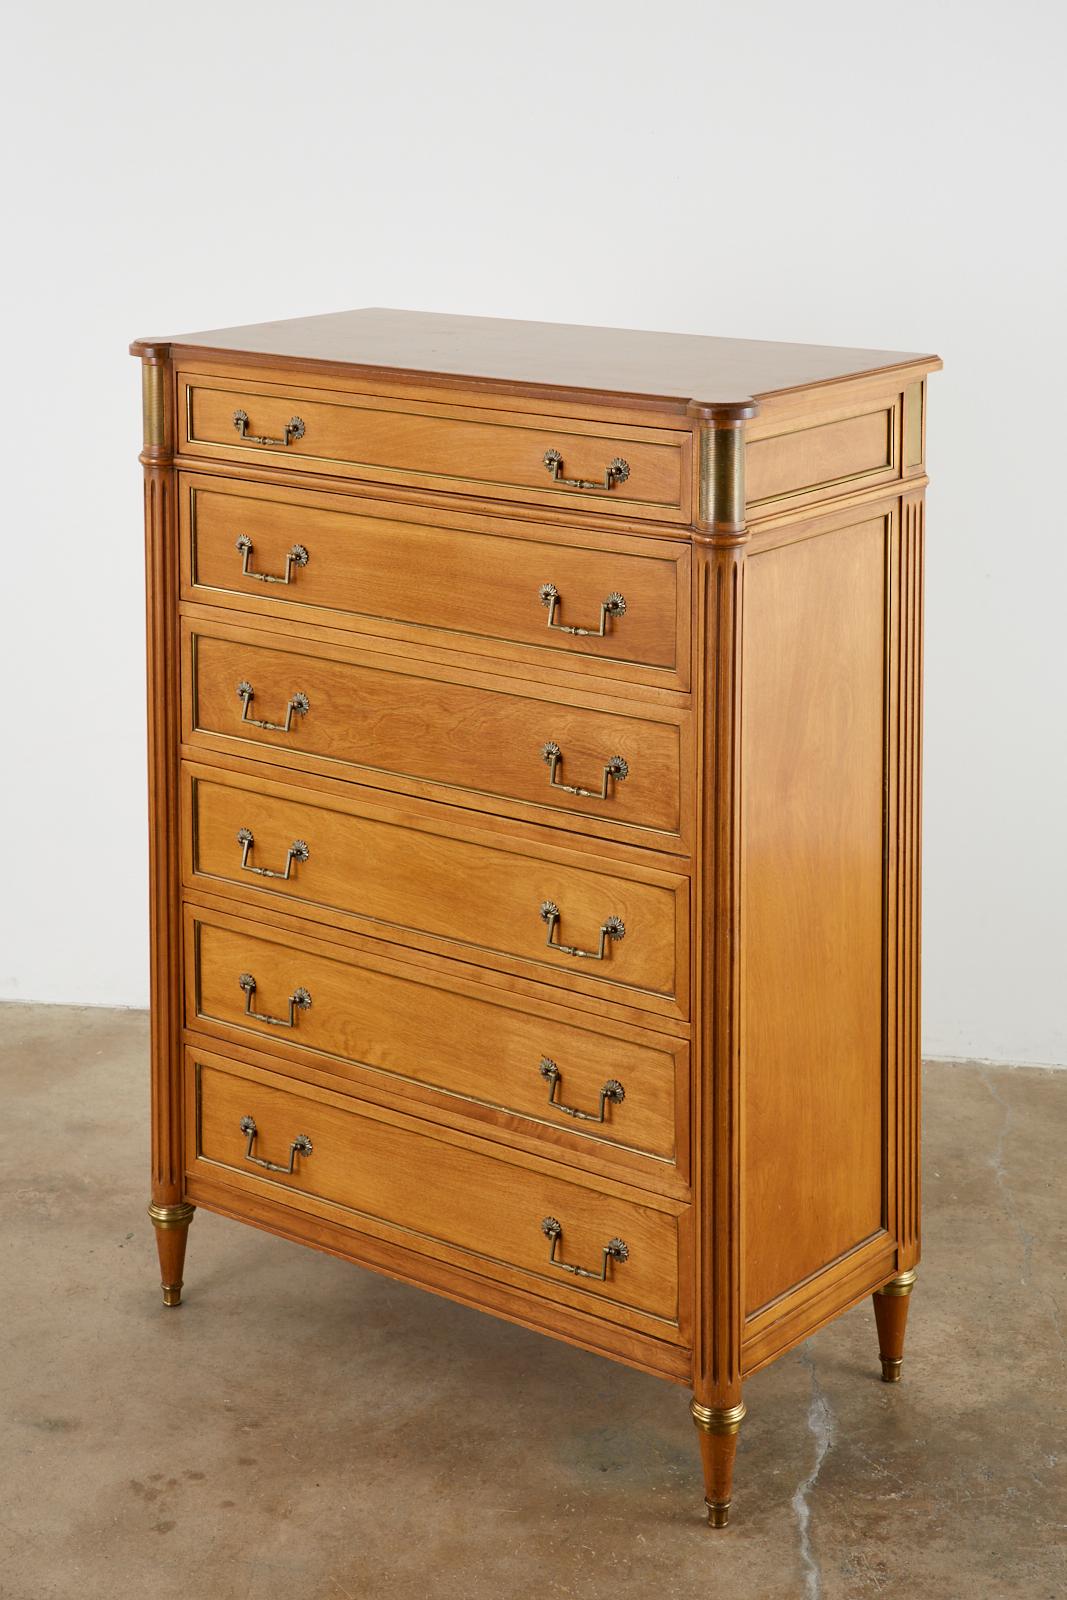 Gorgeous French mahogany tallboy dresser or chest of drawers made in the neoclassical Louis XVI taste. The case is embellished with brass accents on the side panels and drawers. The front of the case has fluted column style corners with bronze